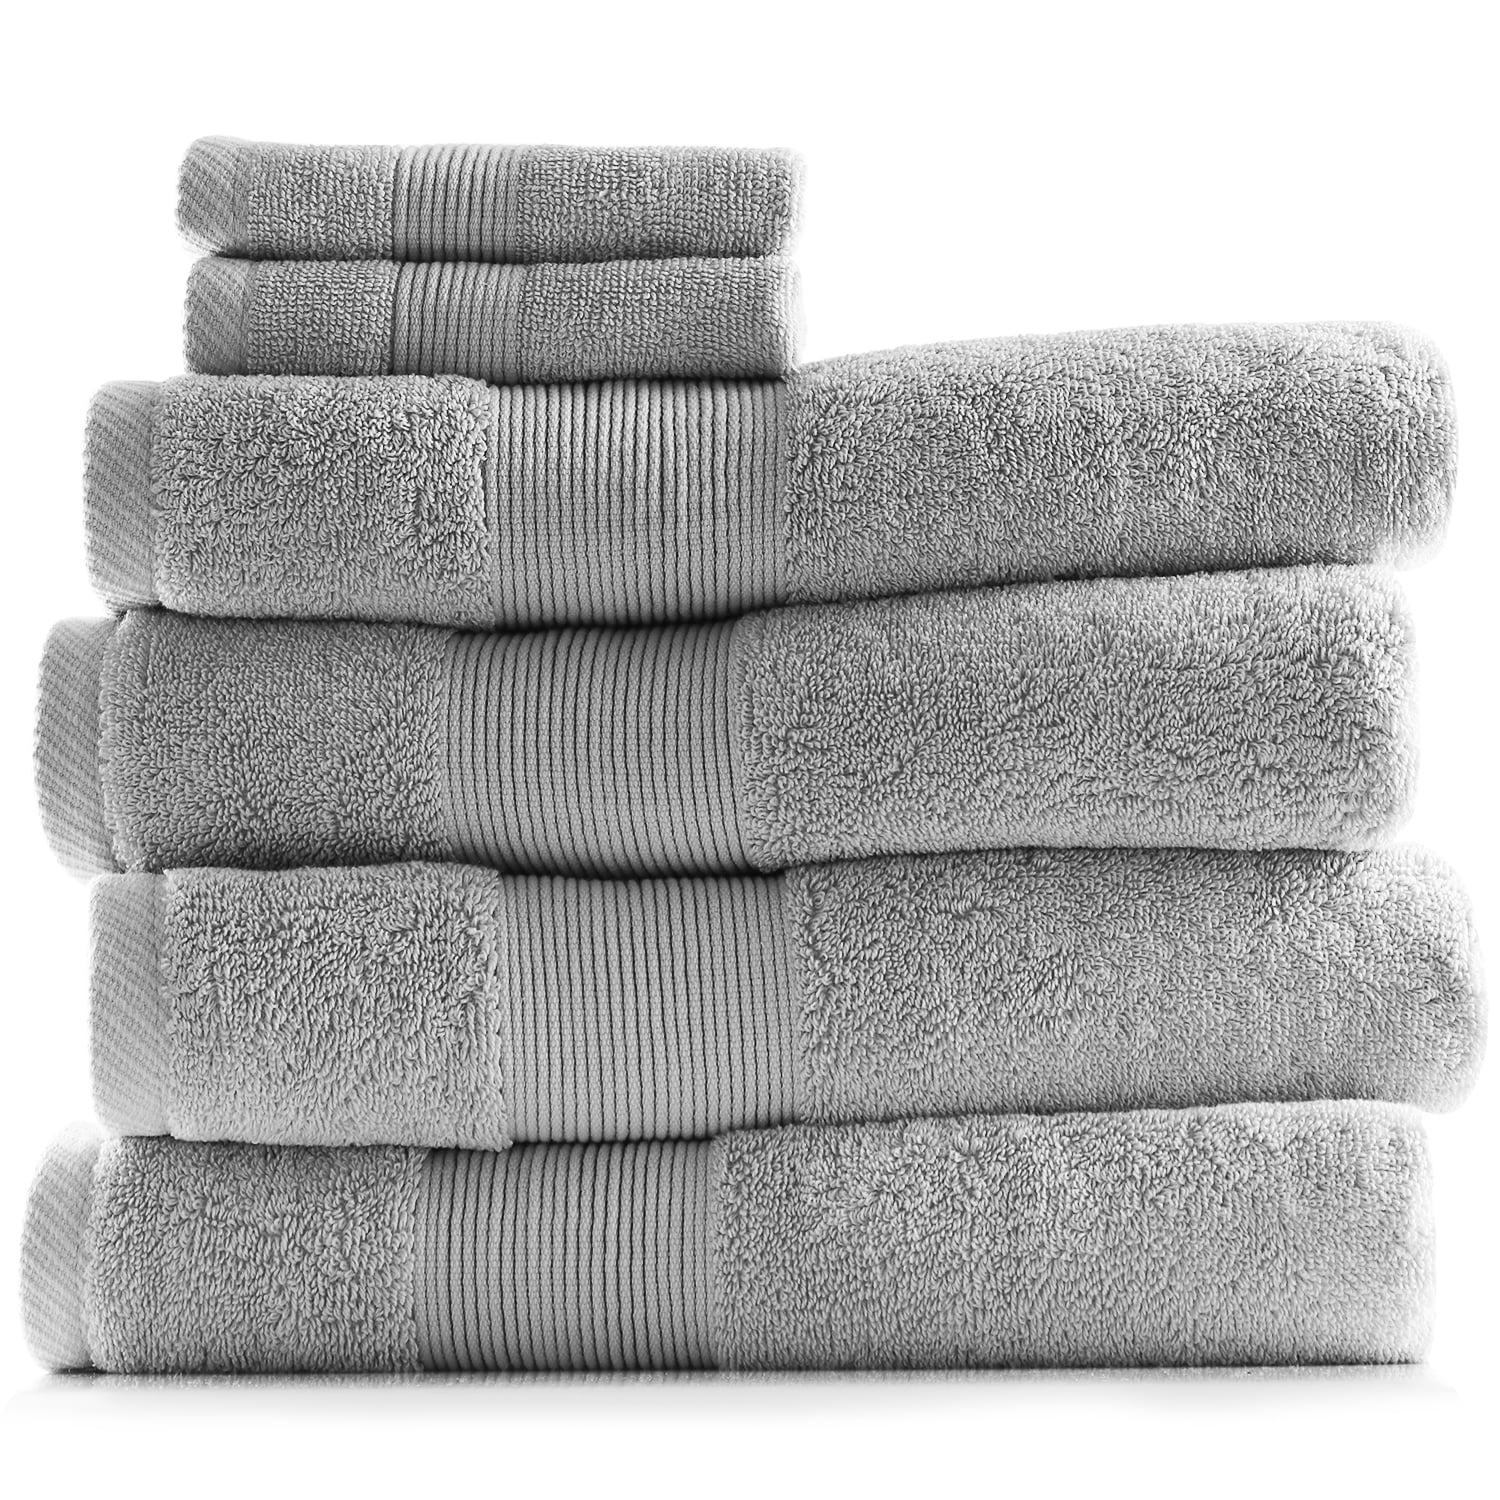 2 Pack 100% Cotton Jumbo Towels Set Bath Sheets Soft XL Size Combed Luxury New 